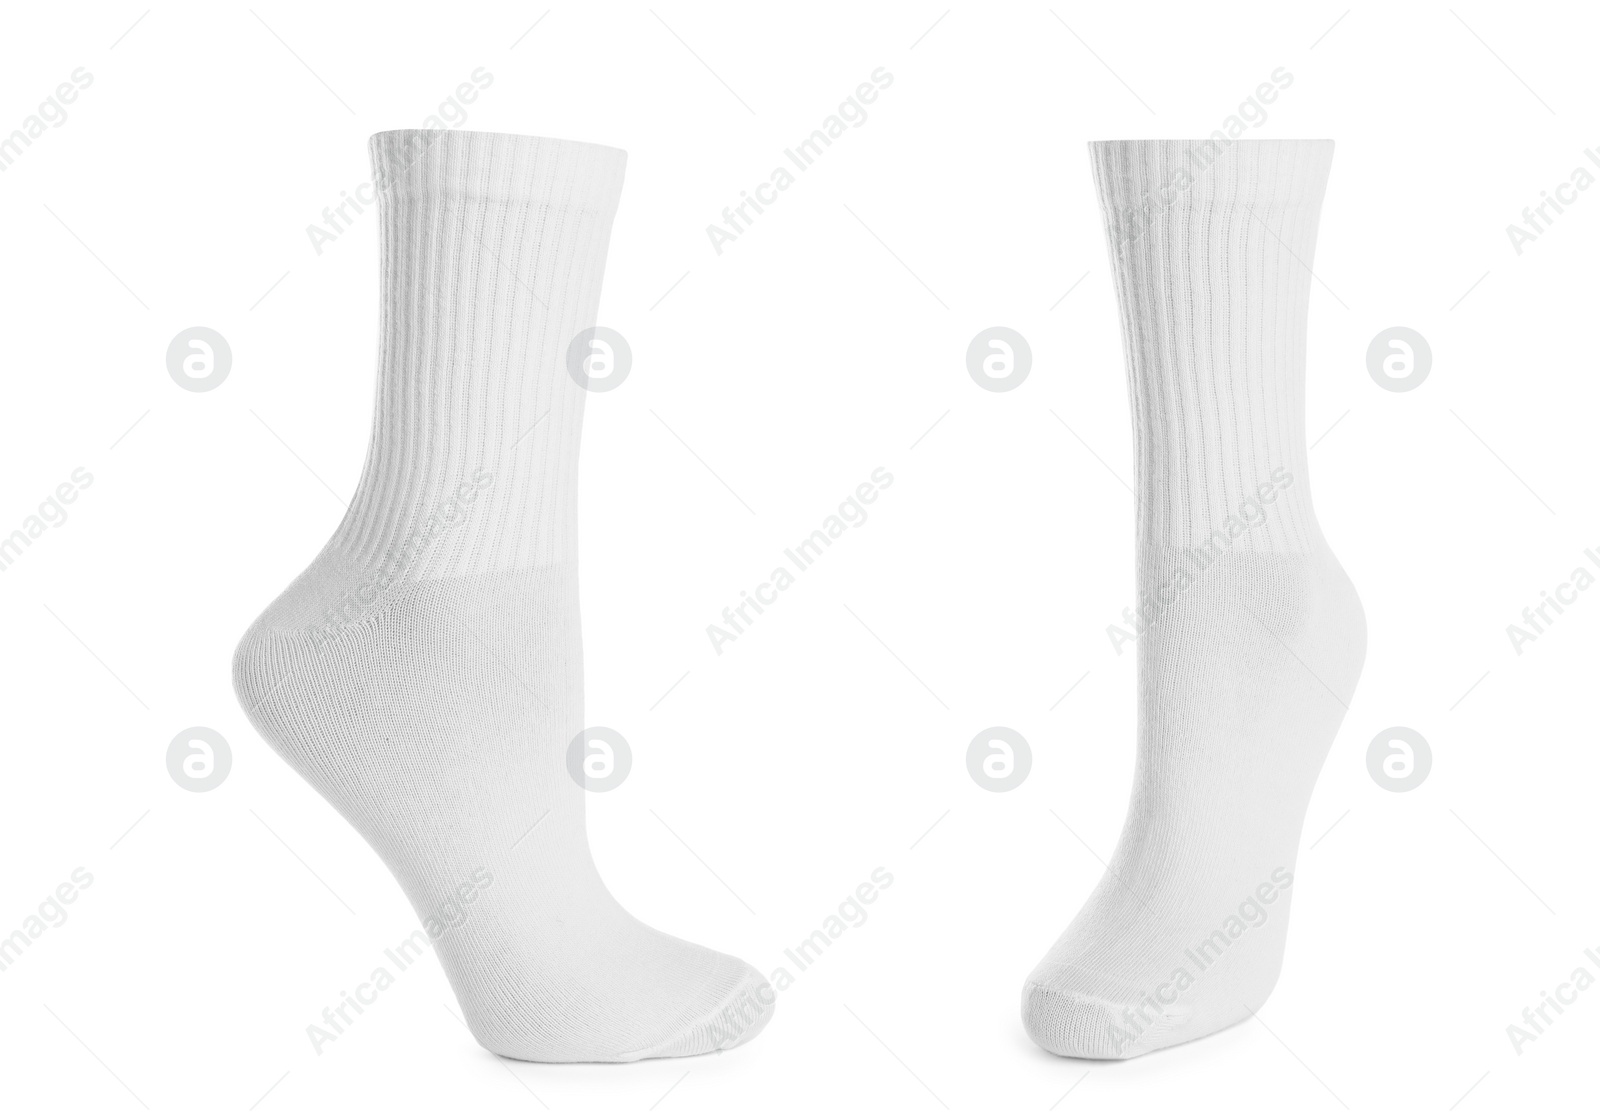 Image of Pair of new socks isolated on white